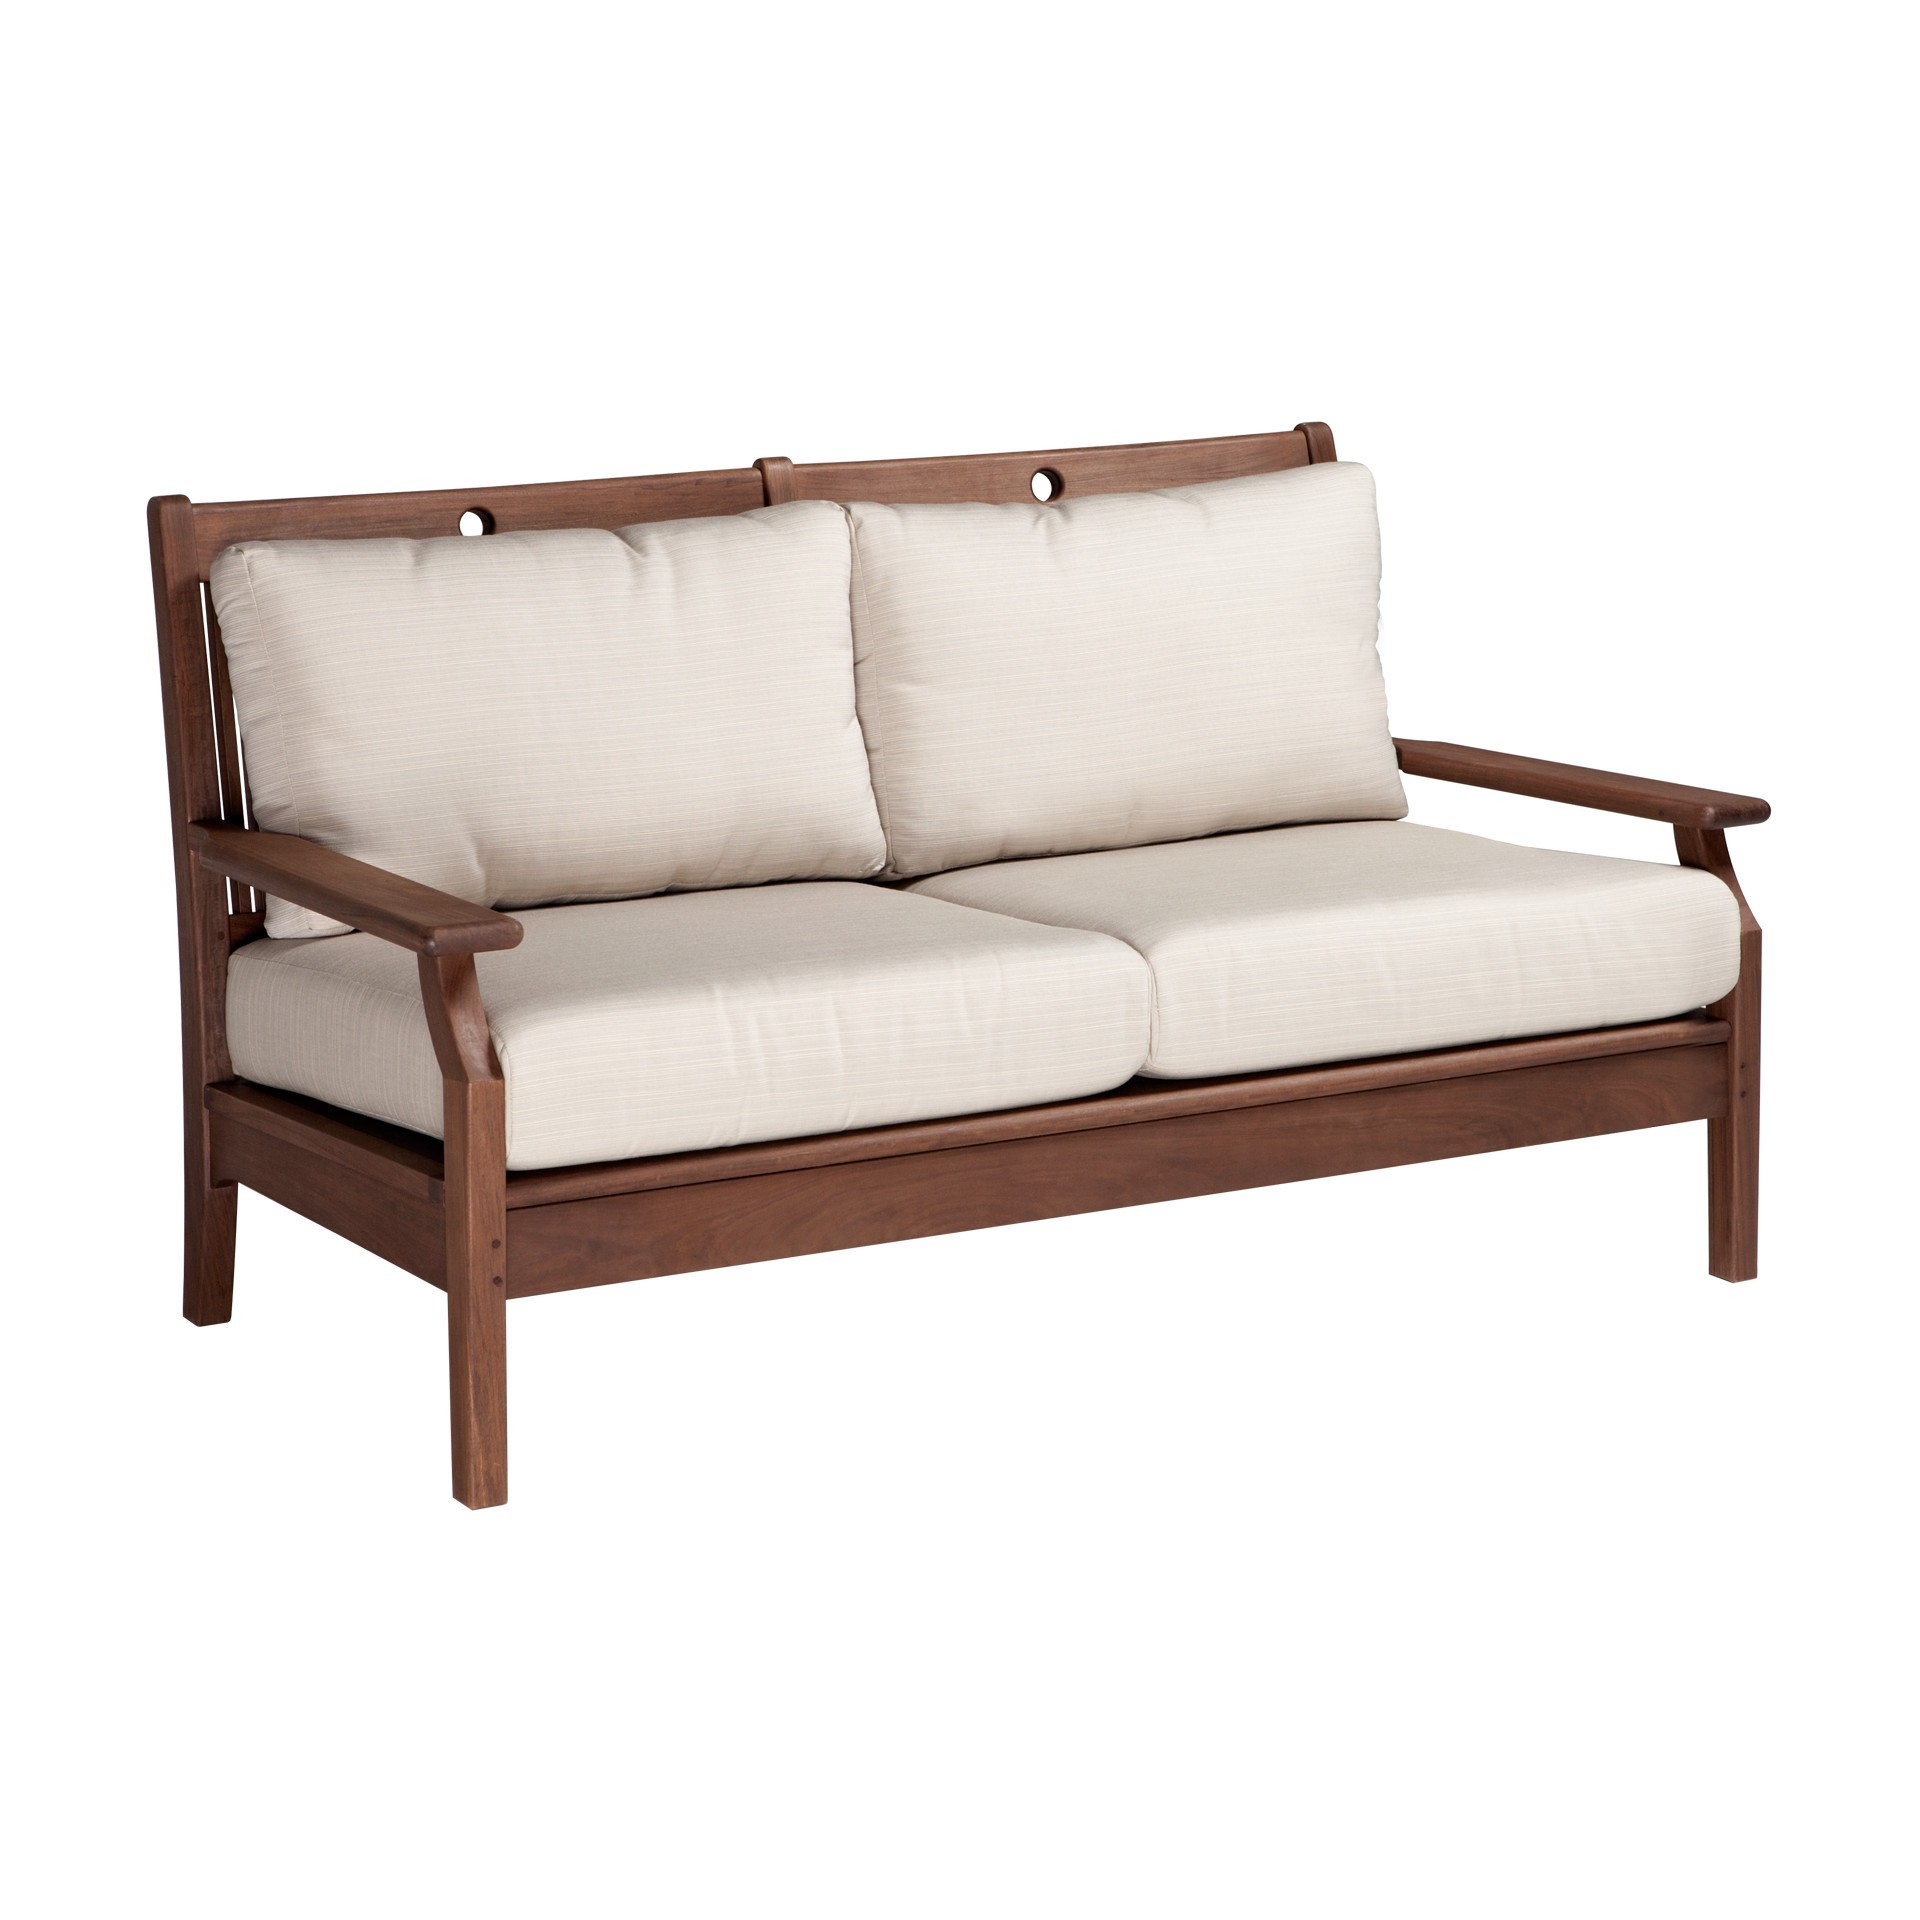 Opal loveseat from Hauser's Patio